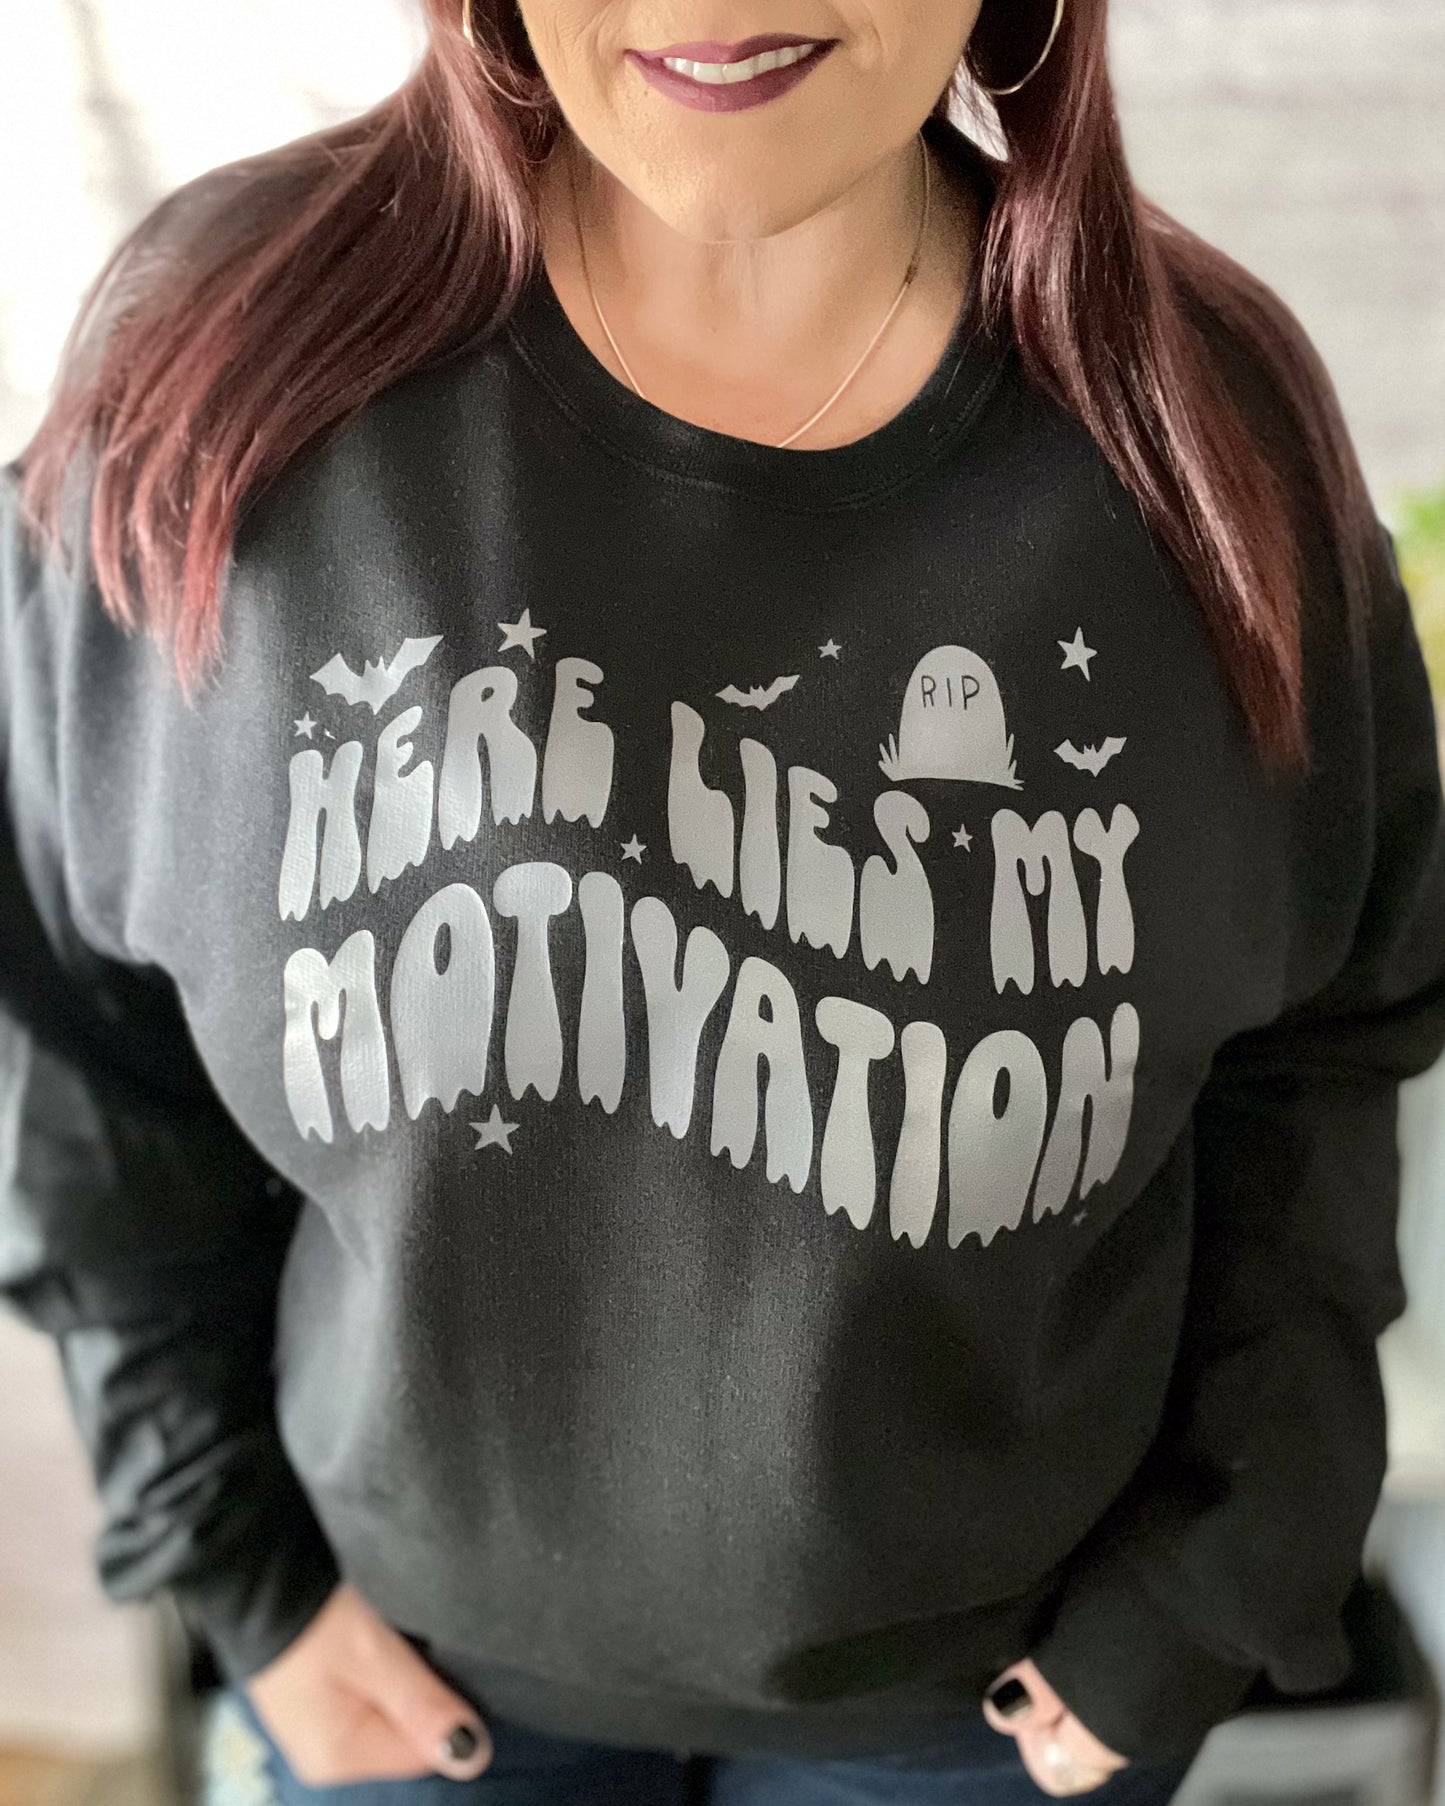 here lies my motivation | graphic top